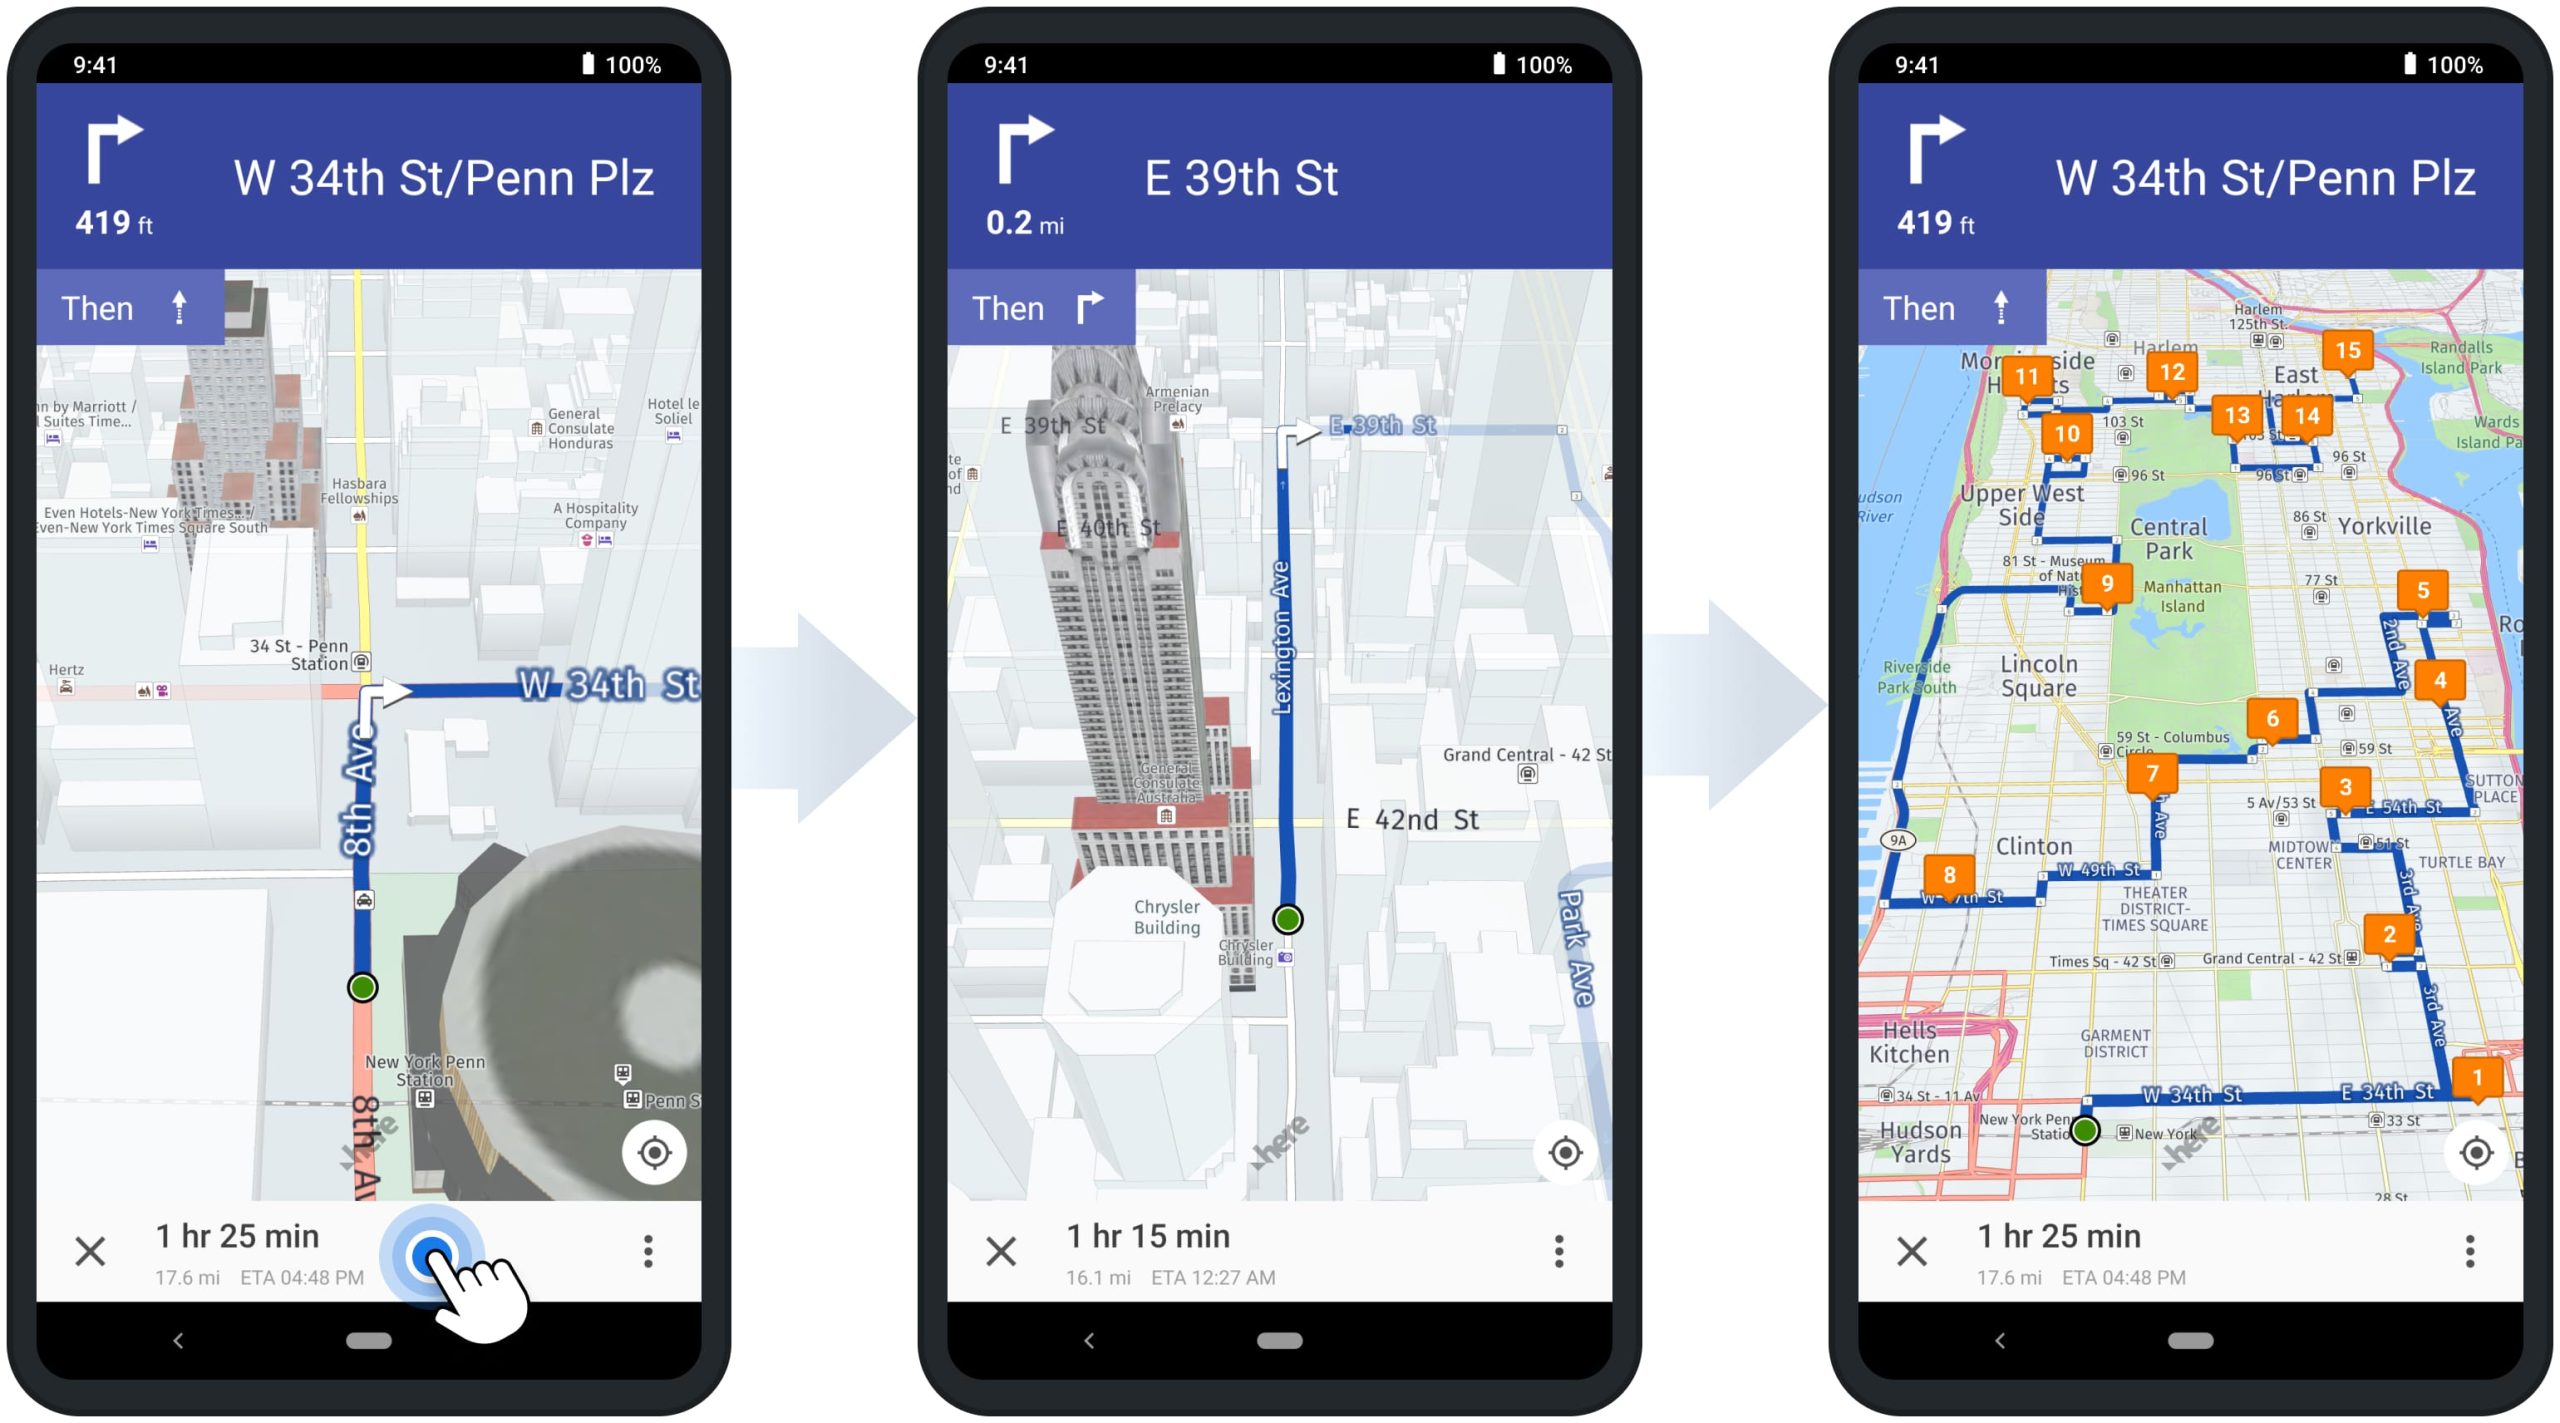 Using route planner app integrated GPS navigation with live traffic, voice directions, and adjustable maps.